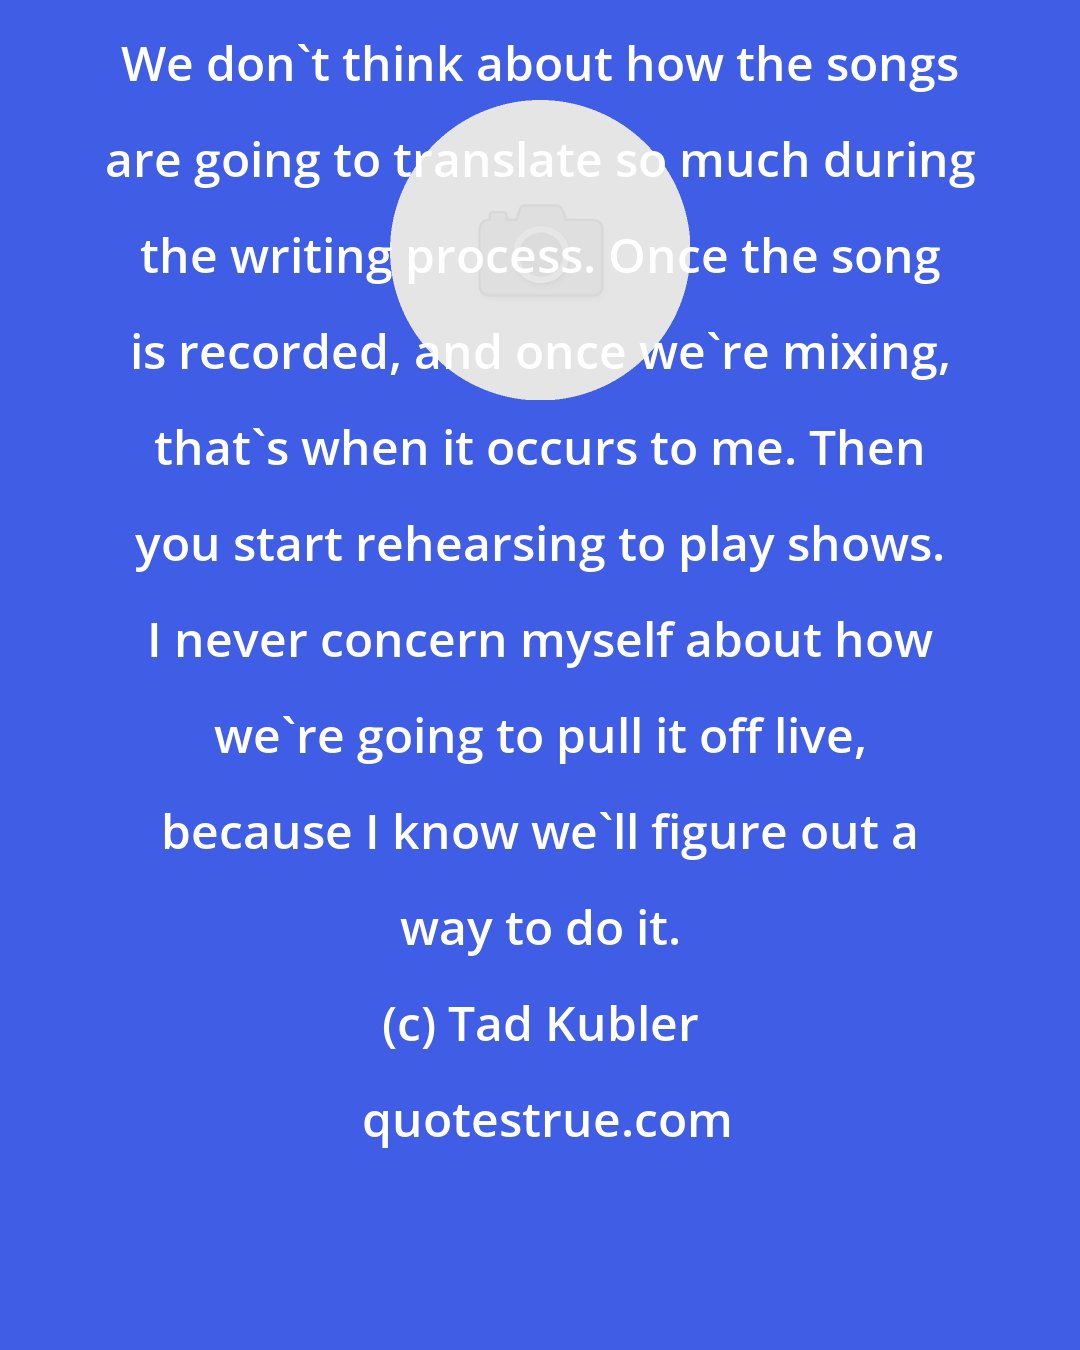 Tad Kubler: We don't think about how the songs are going to translate so much during the writing process. Once the song is recorded, and once we're mixing, that's when it occurs to me. Then you start rehearsing to play shows. I never concern myself about how we're going to pull it off live, because I know we'll figure out a way to do it.